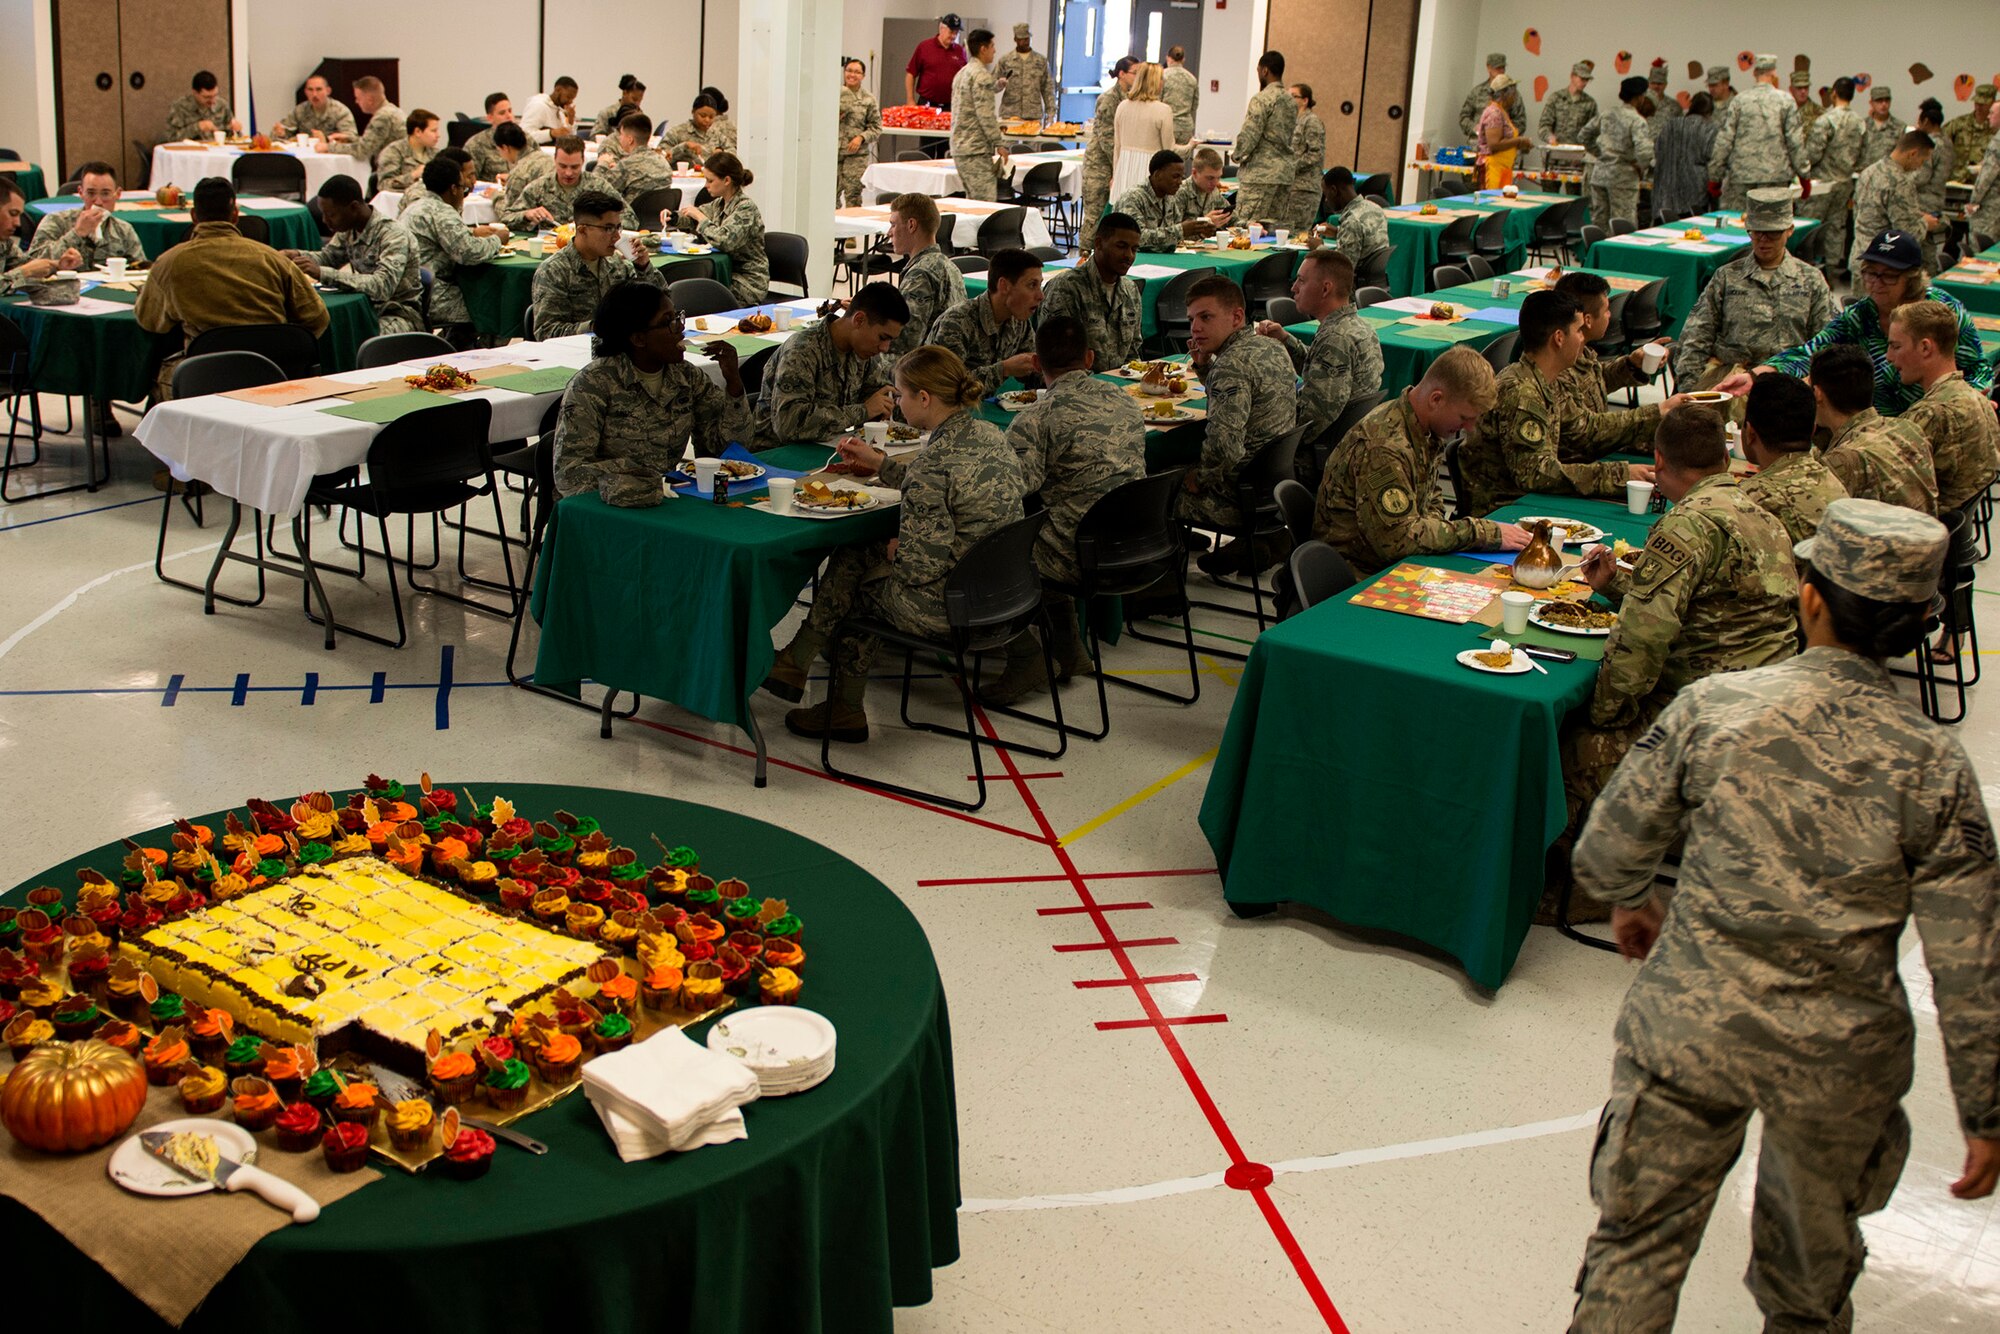 Airmen and their families eat during the Annual Airmen’s Thanksgiving luncheon, Nov. 14, 2017, at Moody Air Force Base, Ga. Moody Chiefs Group, with the support of various base organizations, held the luncheon because many Airmen are unable to return home for Thanksgiving. (U.S. Air Force photo by Airman 1st Class Erick Requadt)